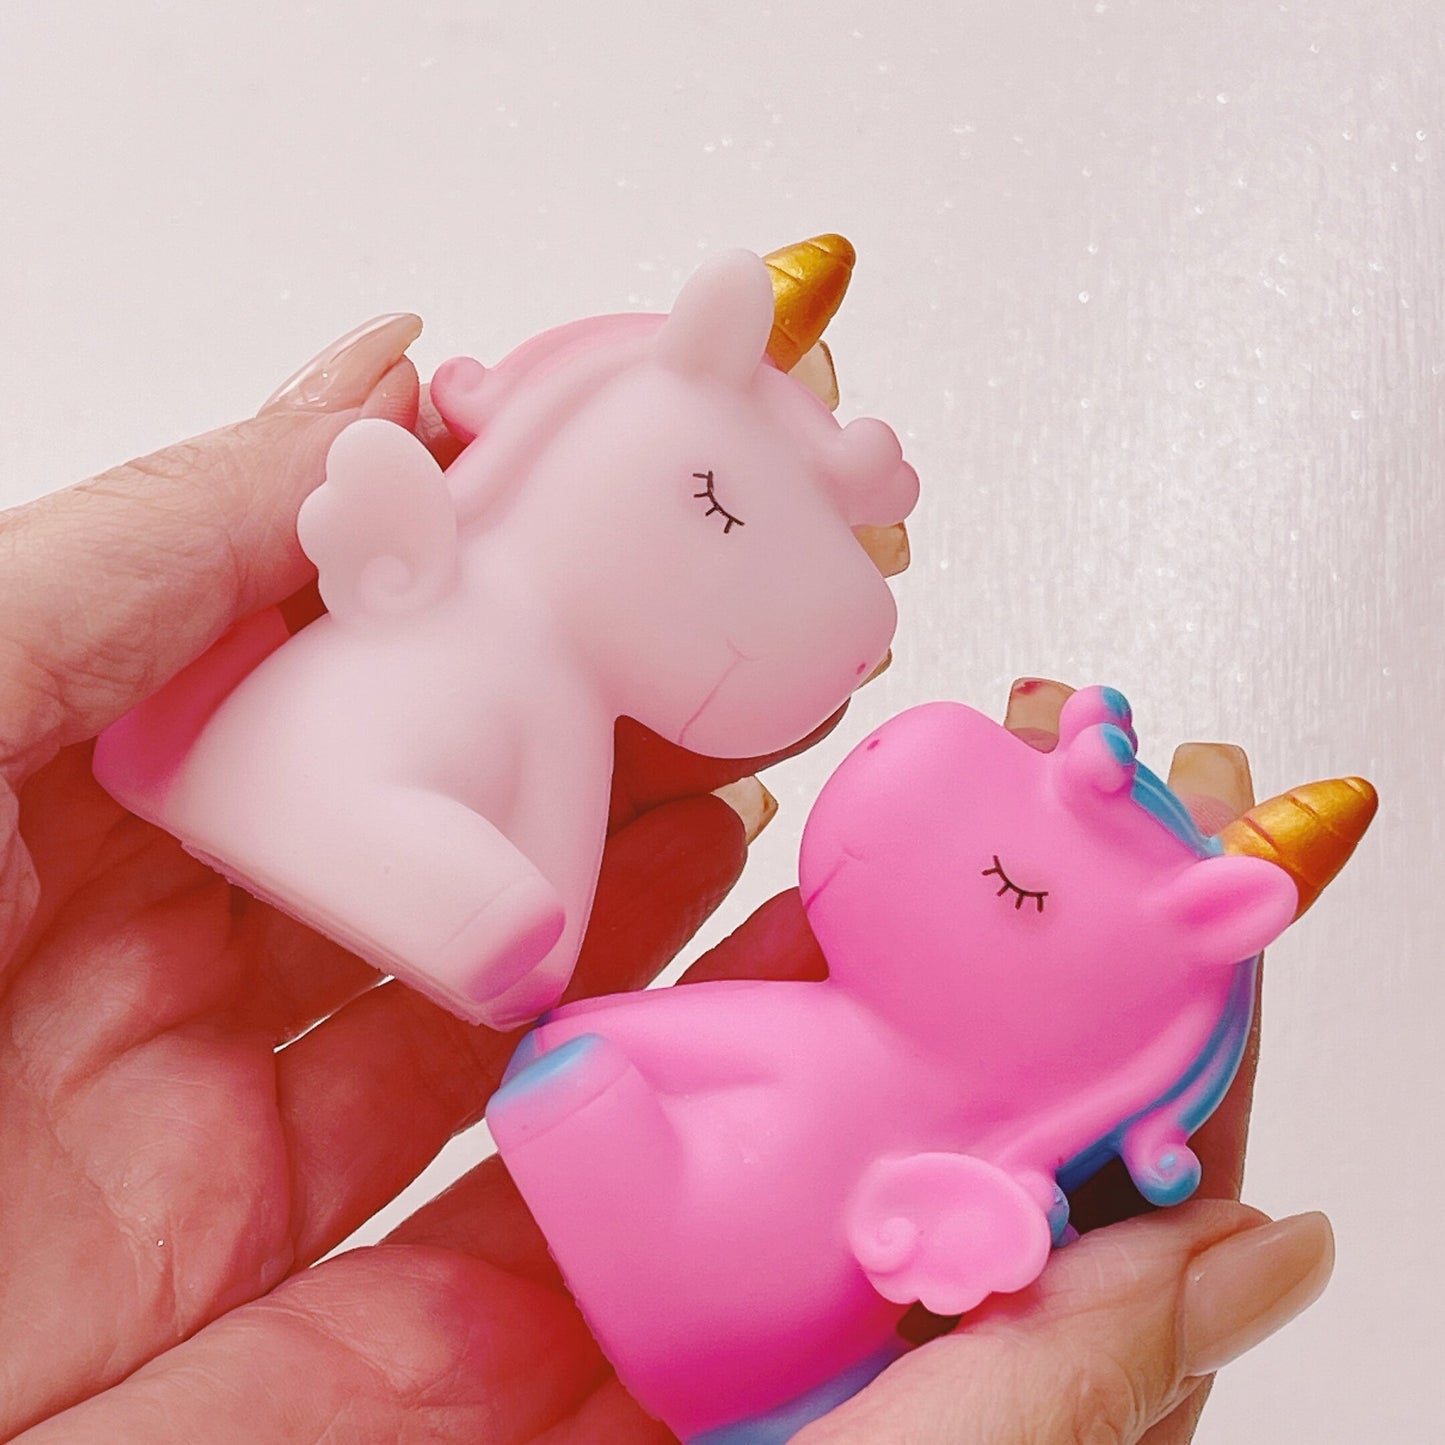 Pack of 2 Rubber Unicorn Cake Toppers